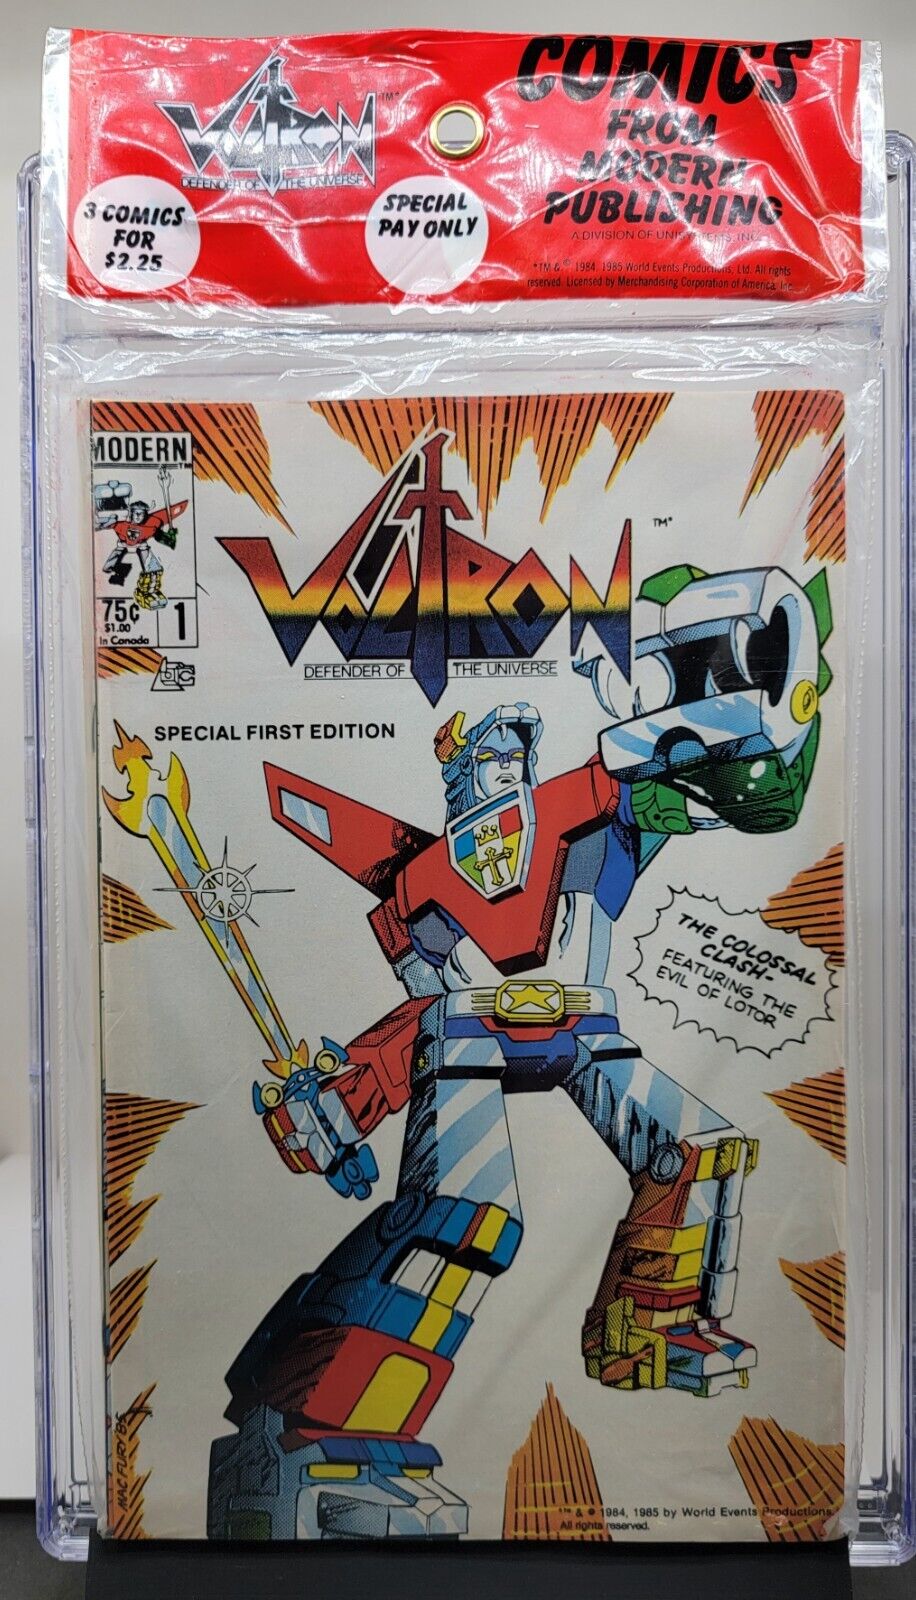 Voltron 1, 2 & 3 - Modern Publishing - Still sealed in polybag